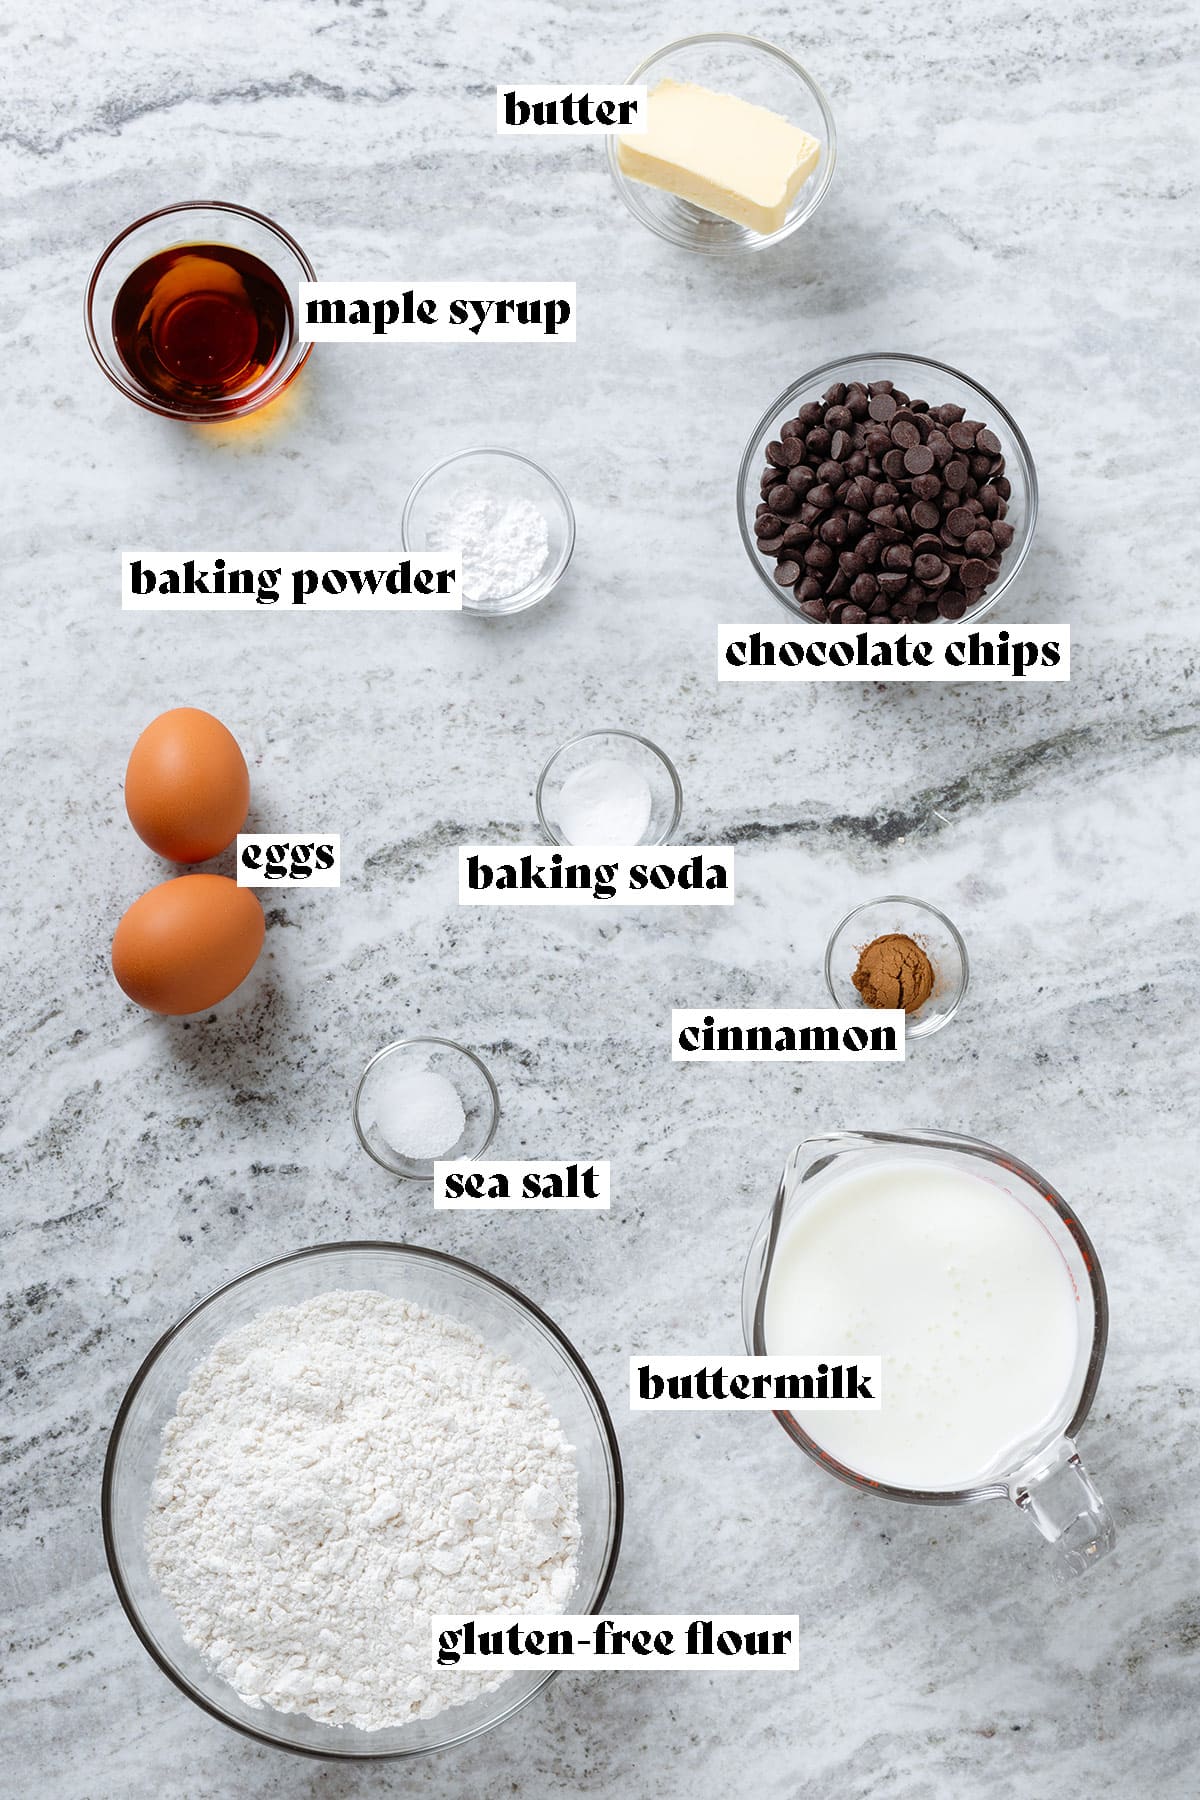 Flour, eggs, buttermilk, chocolate chips, maple syrup, butter, and other ingredients all measured and laid out with text overlay.